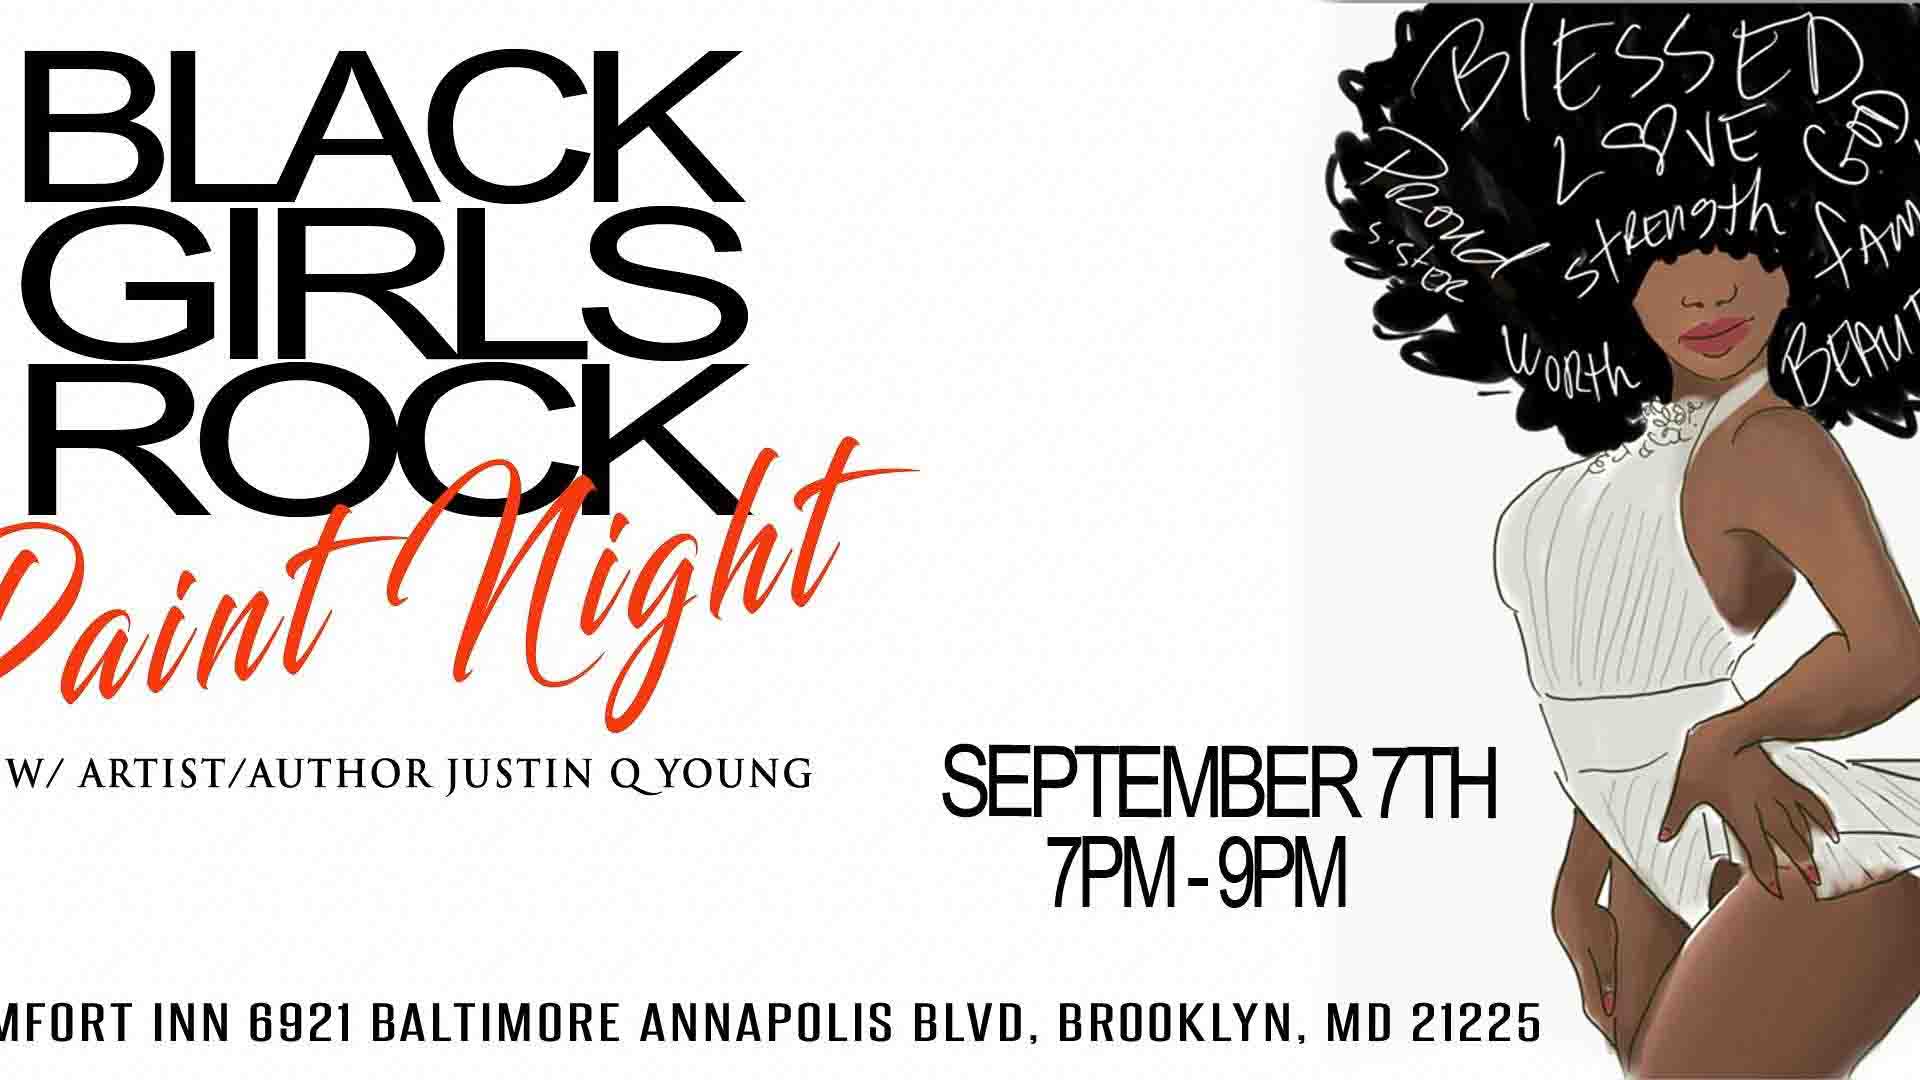 Black Girls Rock! is an annual award show, founded by former DJ and model Beverly Bond, that honors and promotes Black women in different fi...